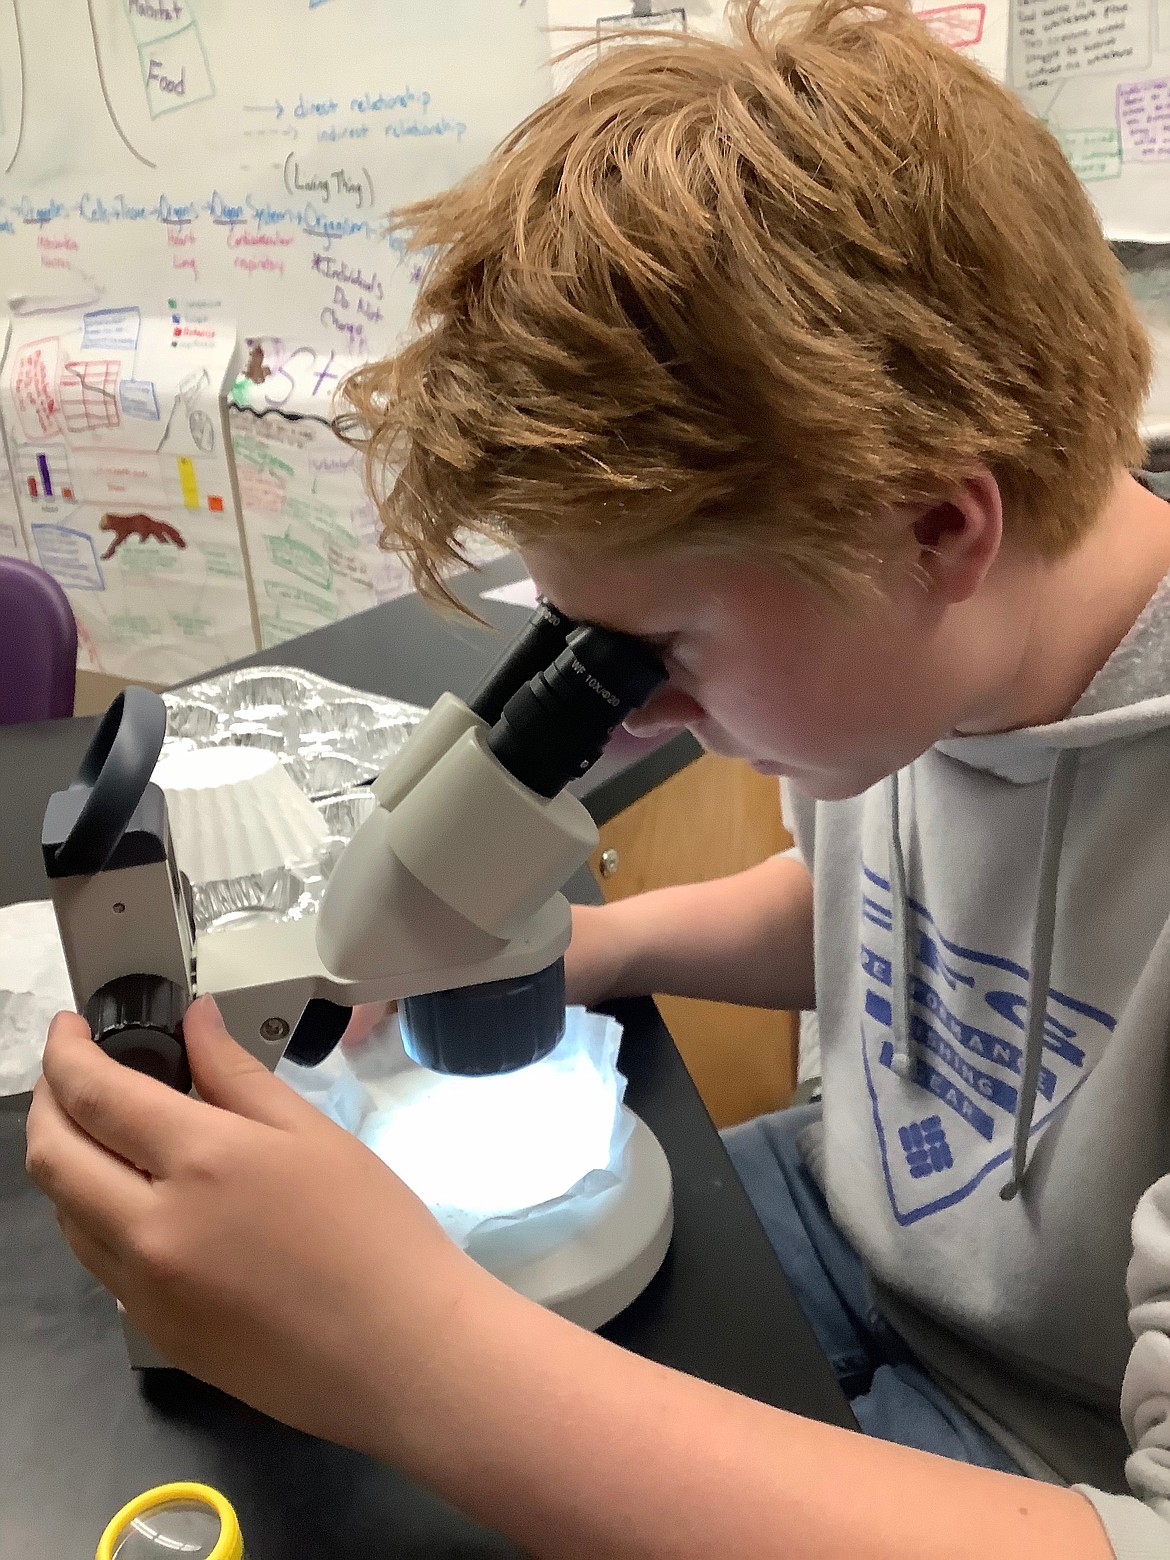 Kalispell Middle School Science Club member Sam Syverson looks for microplastic in water samples taken from Foys Lake as part of a research project for the SMART Schools Challenge organized by the Montana Department of Environmental Quality. (Courtesy photo)